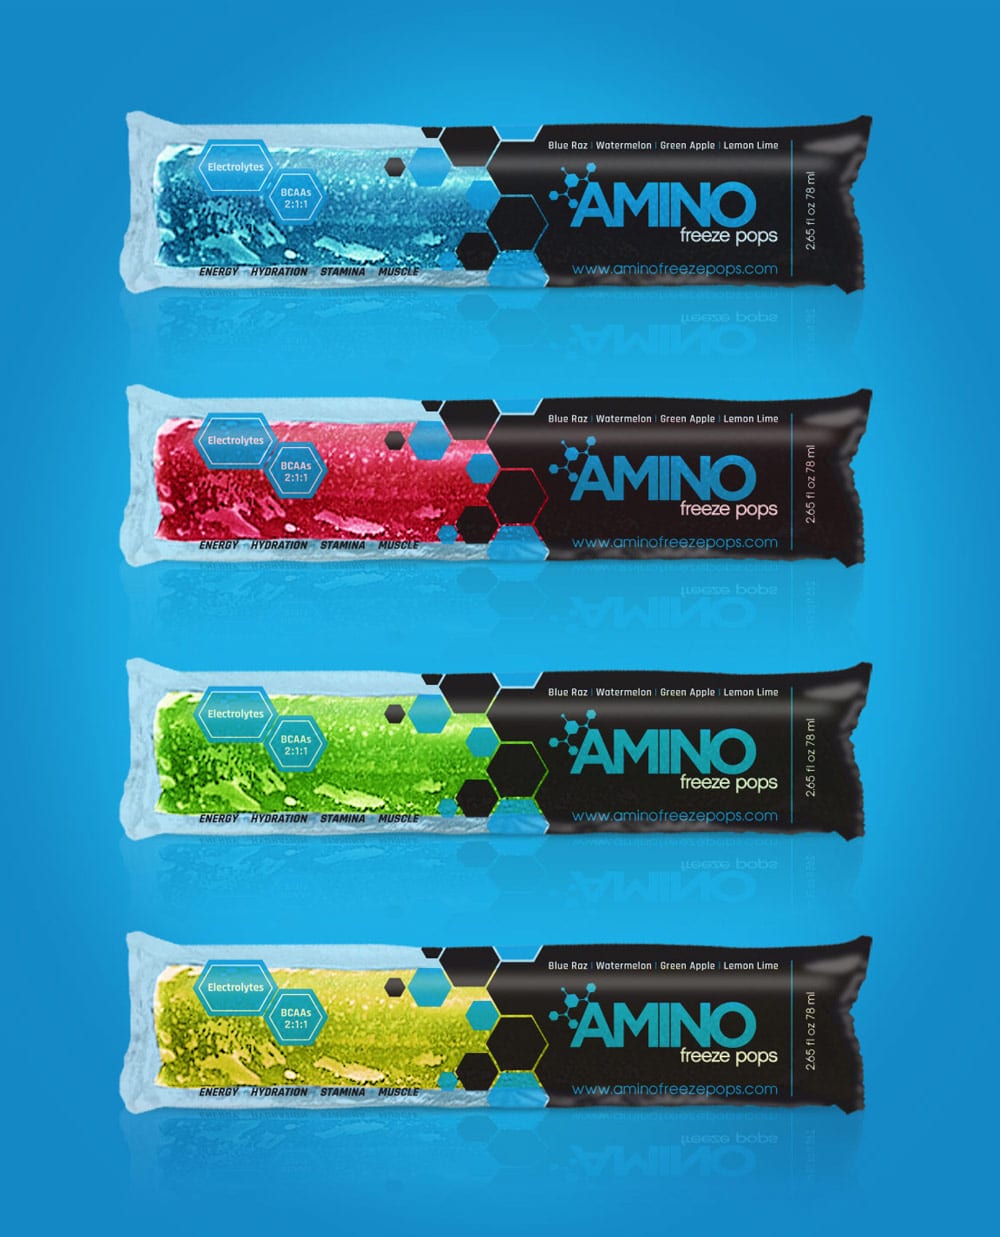 Amino Freeze Pops Packaging